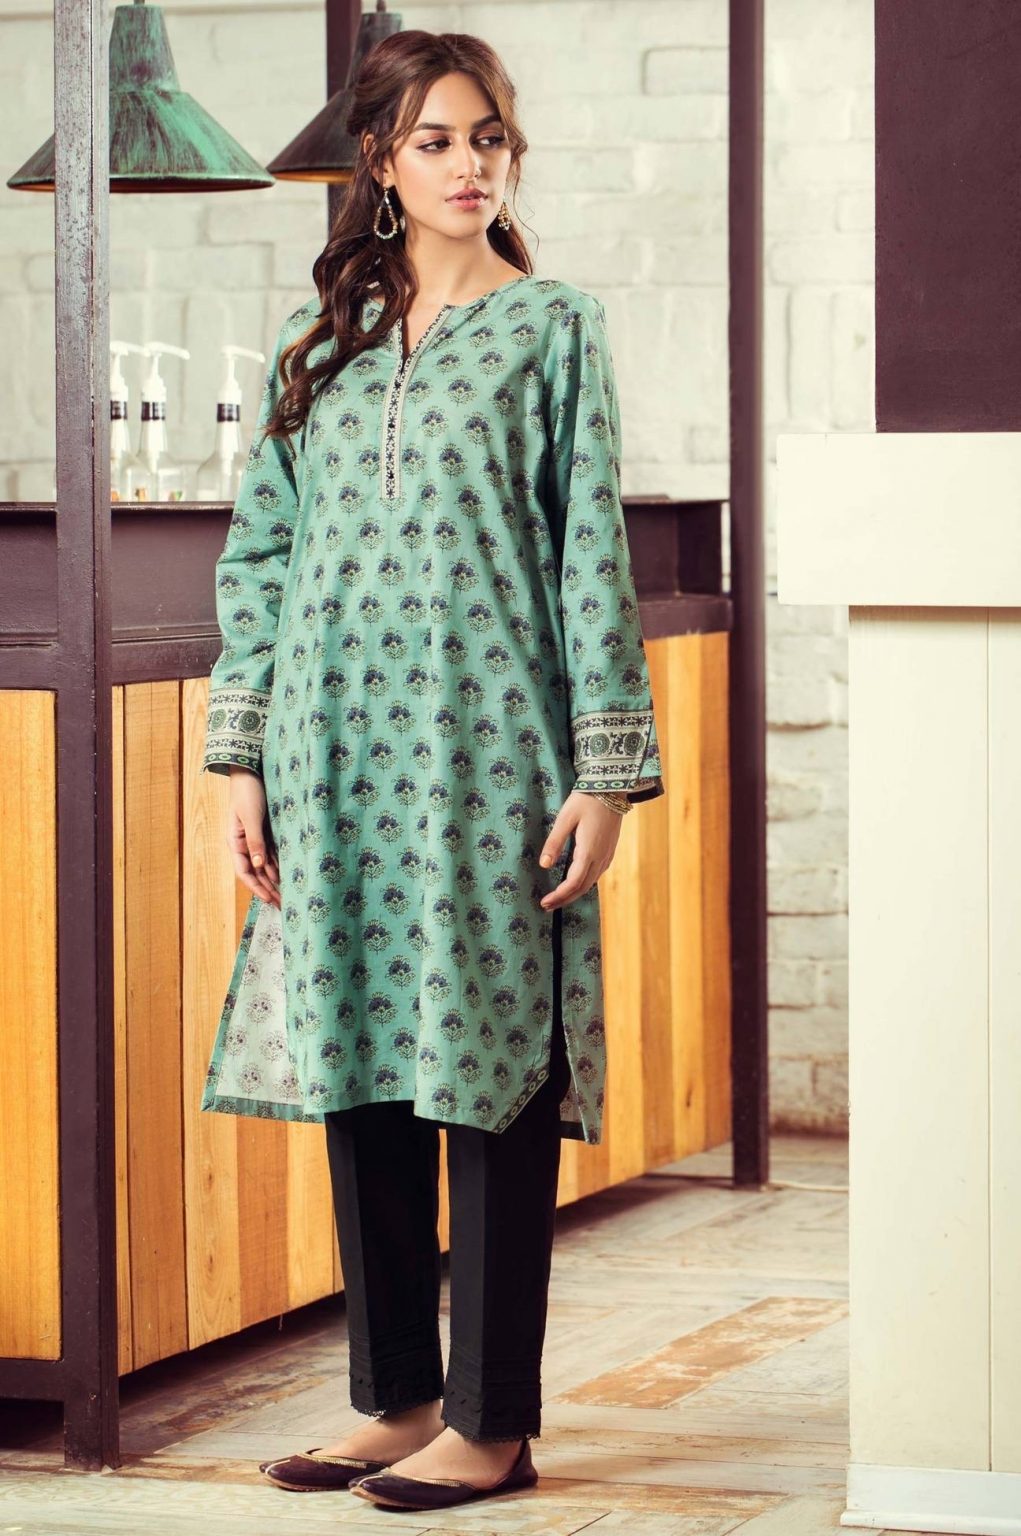 Anzela Abbasi Latest Photoshoot For Zeen Clothing | Reviewit.pk